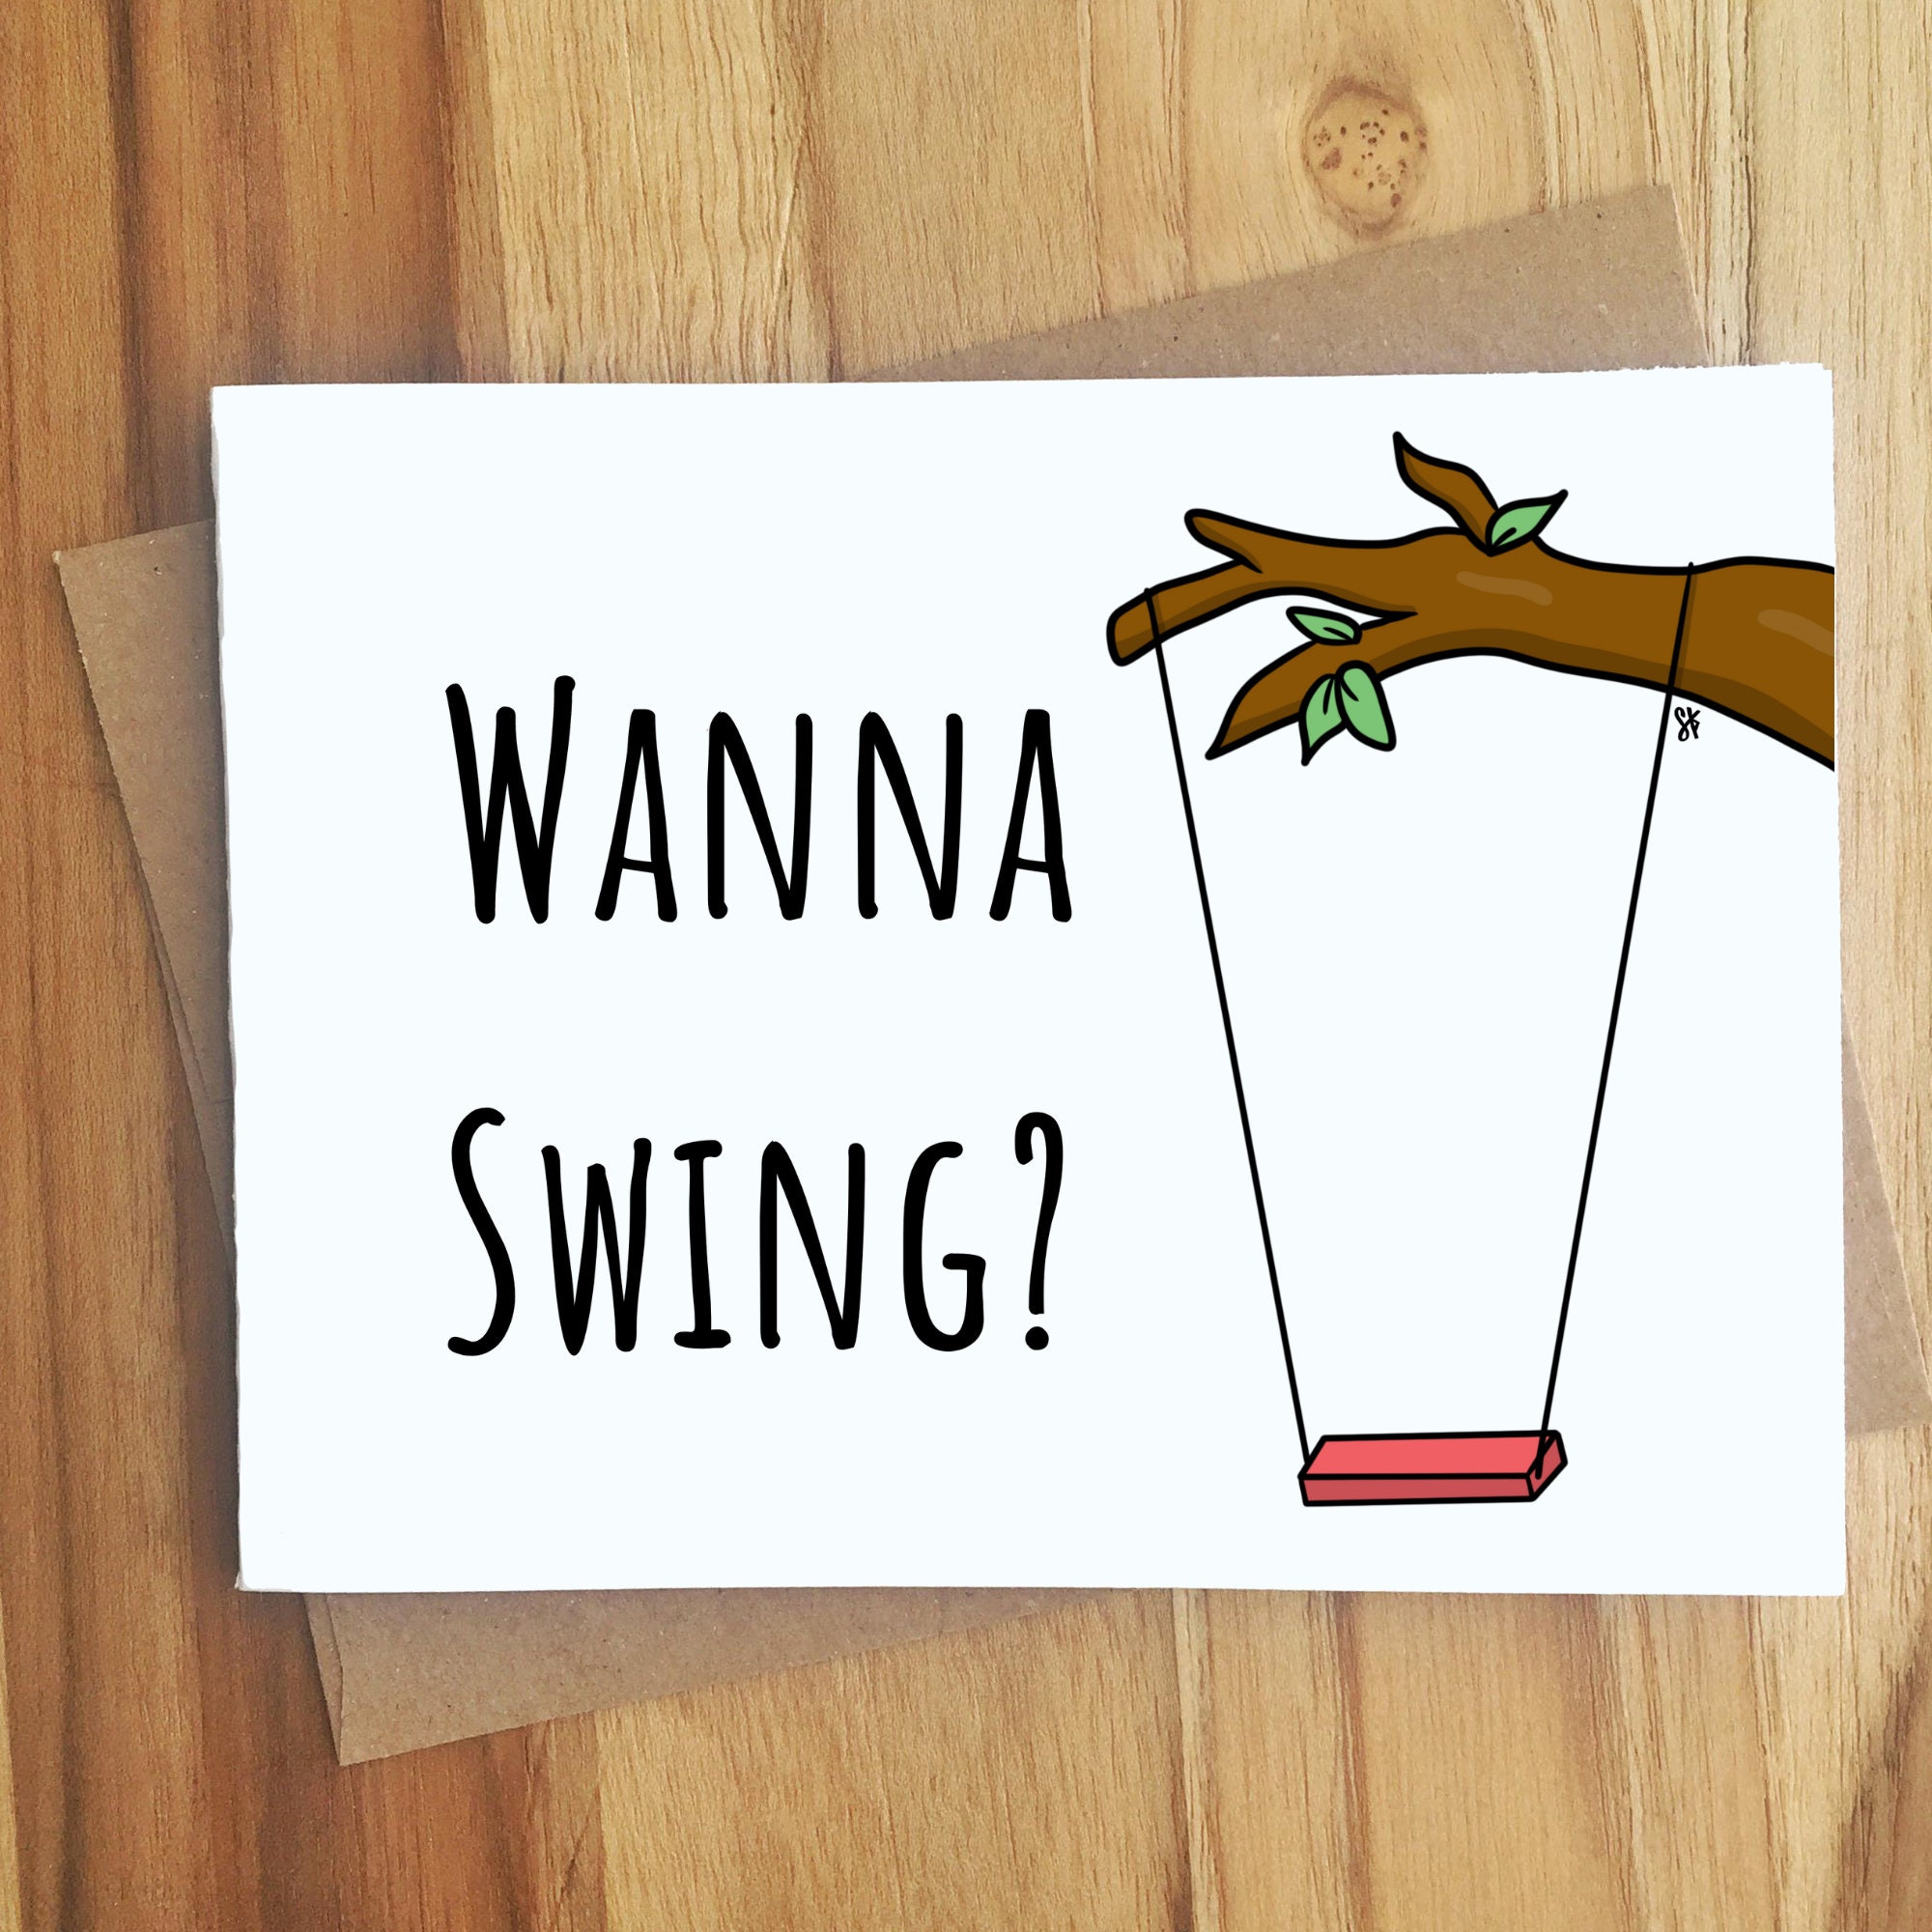 Wanna Swing Swinger Pun Greeting Card / Innuendo Dirty Play on pic